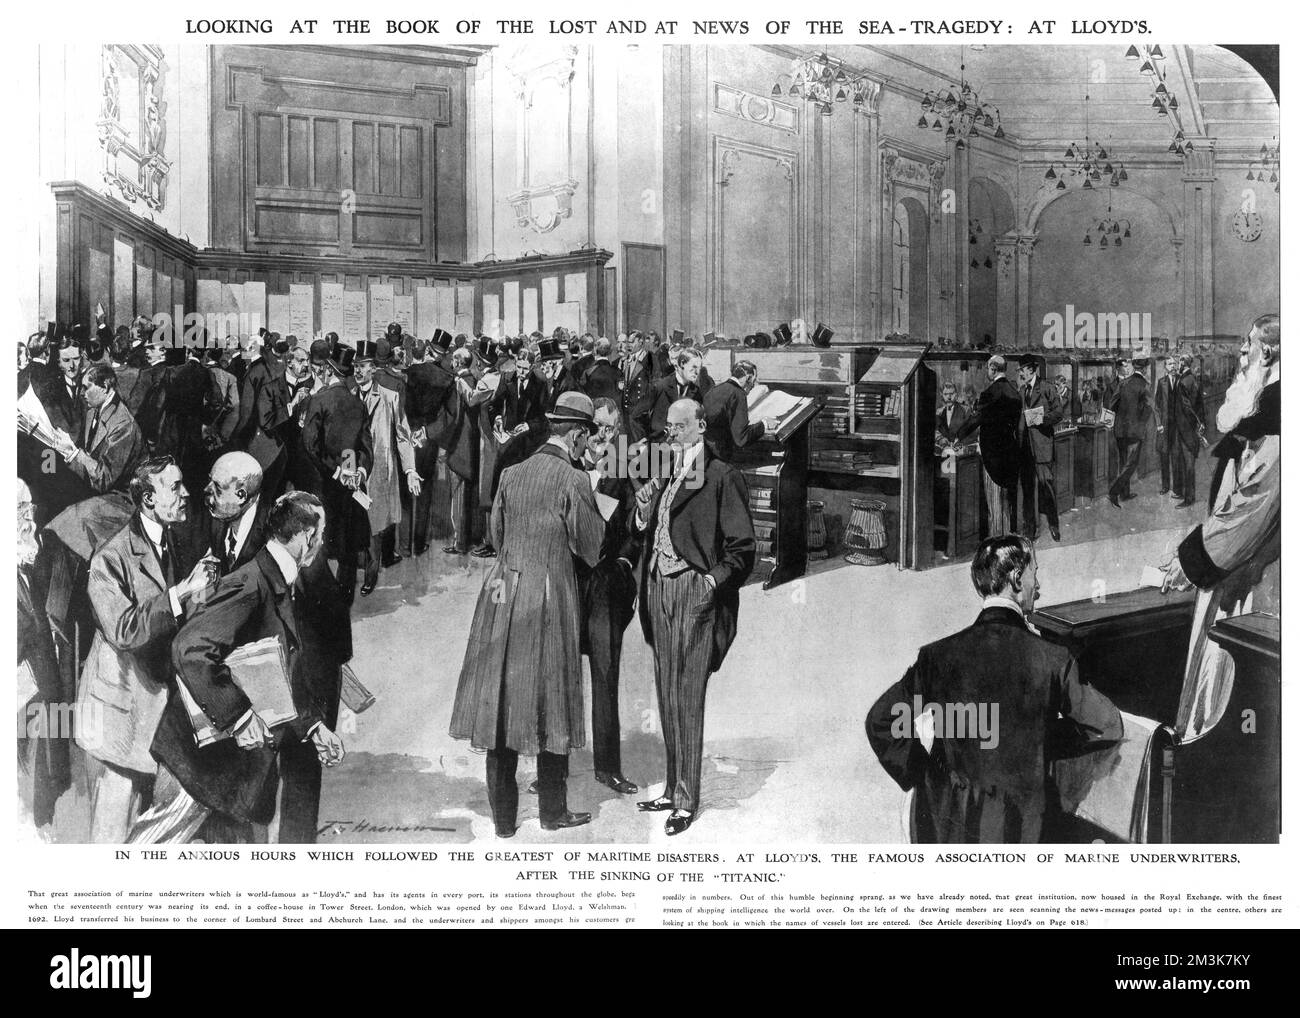 'In the anxious hours which followed the greatest of Maritime disasters: At Lloyd's, the famous association of Marine Underwriters. After the sinking of the 'Titanic'.'     Date: 27th April 1912 Stock Photo